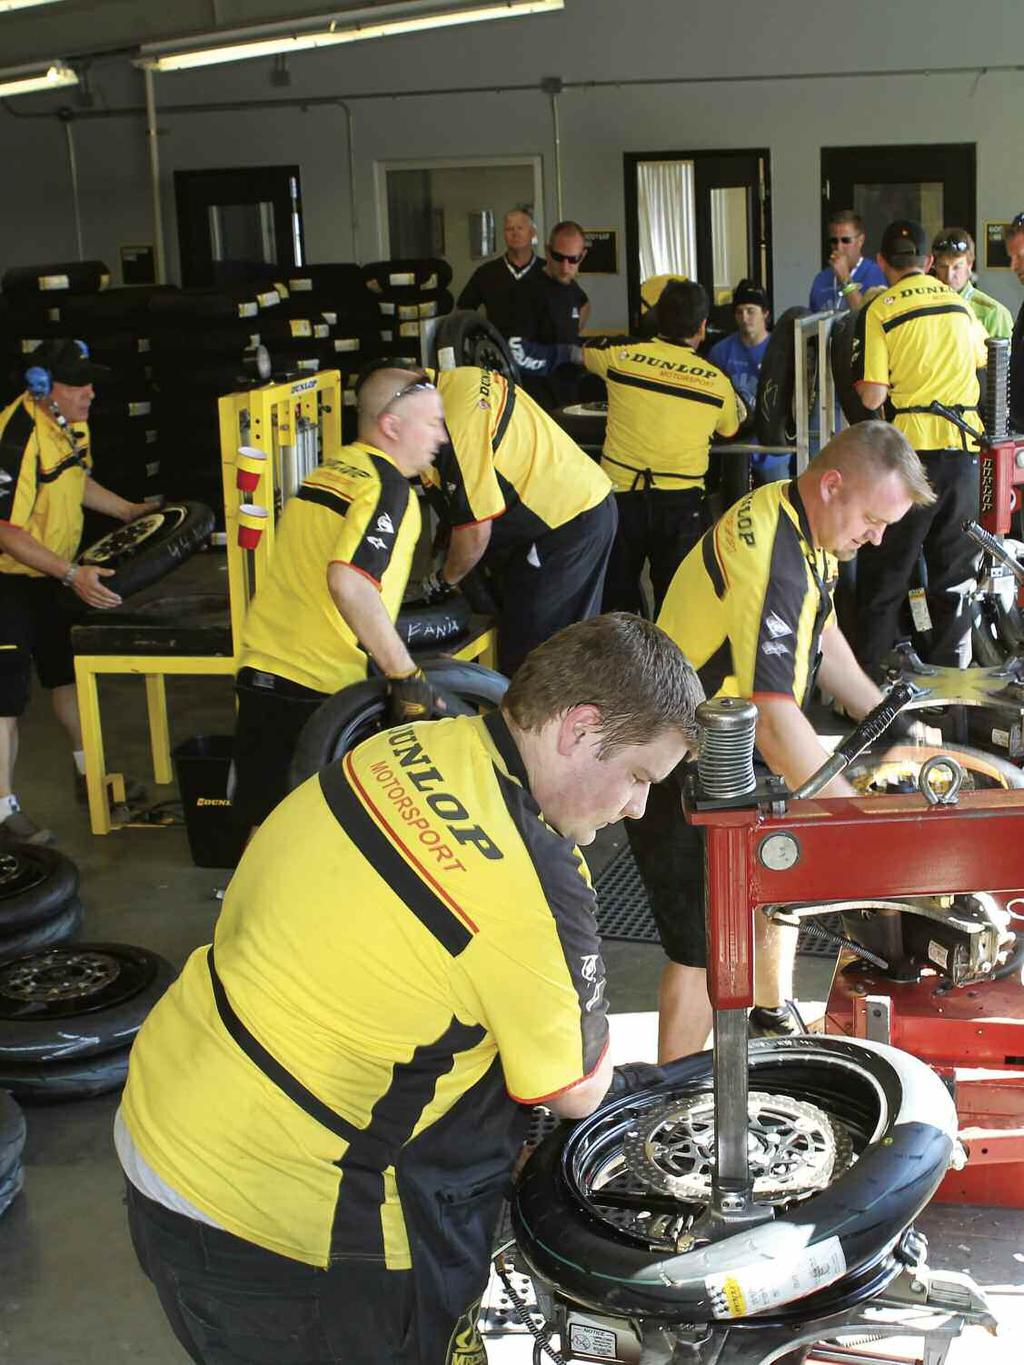 BY THE NUMBERS: THE DUNLOP TIRE SUPPLY STORY As the old proverb goes, the longest journey begins with a single step.